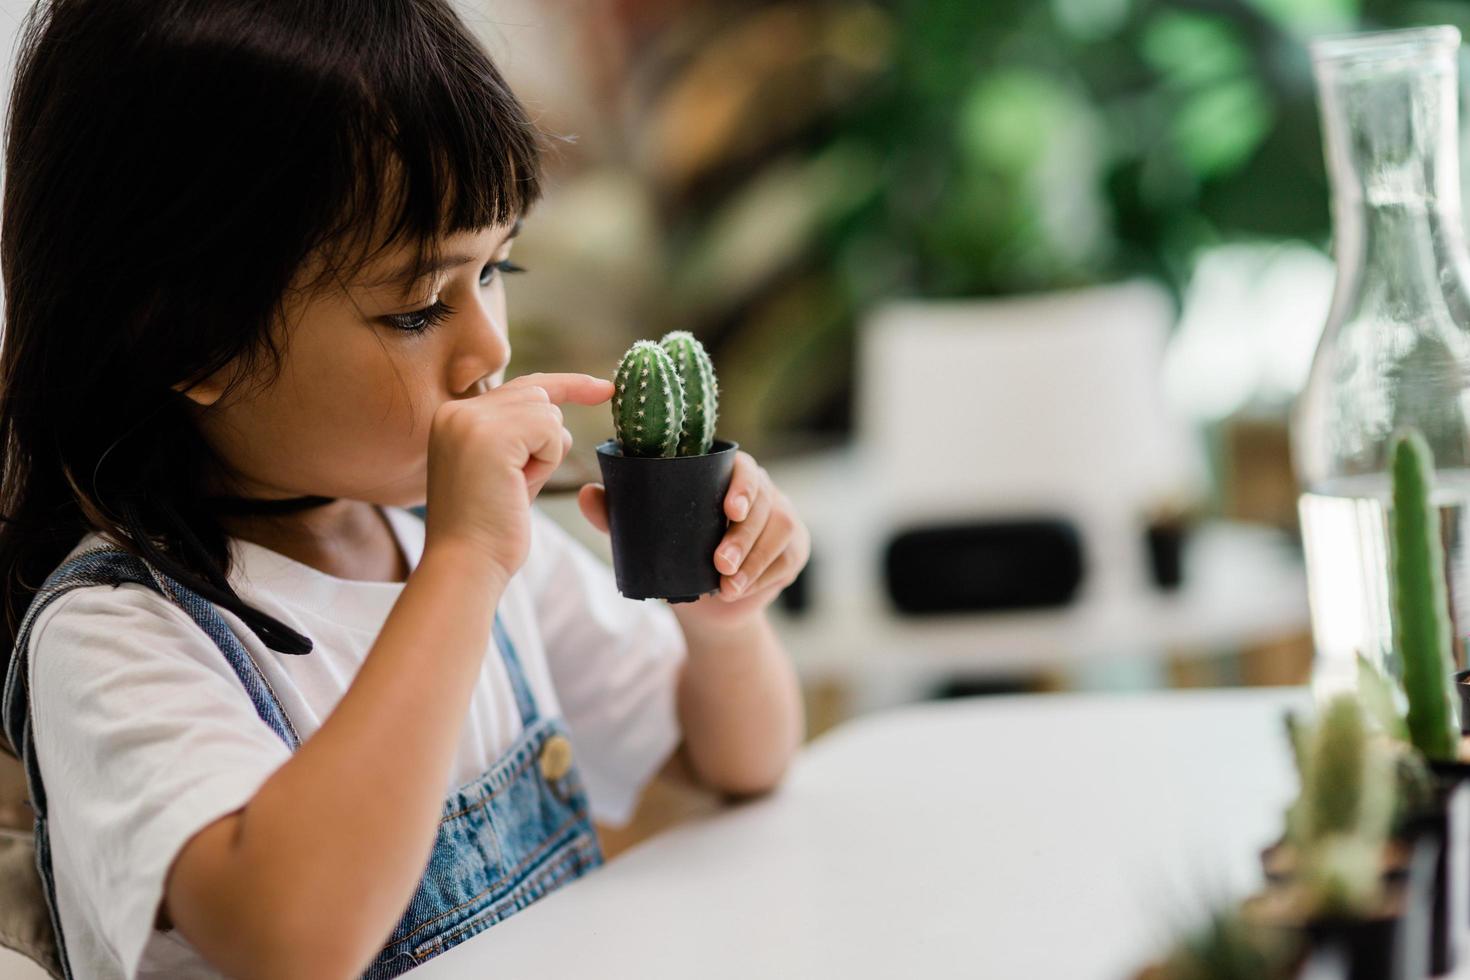 kid gently touch new stem of the cactus he grows with care, one hand holds magnifying glass.Nature education, Montessori and observation skills concept. photo